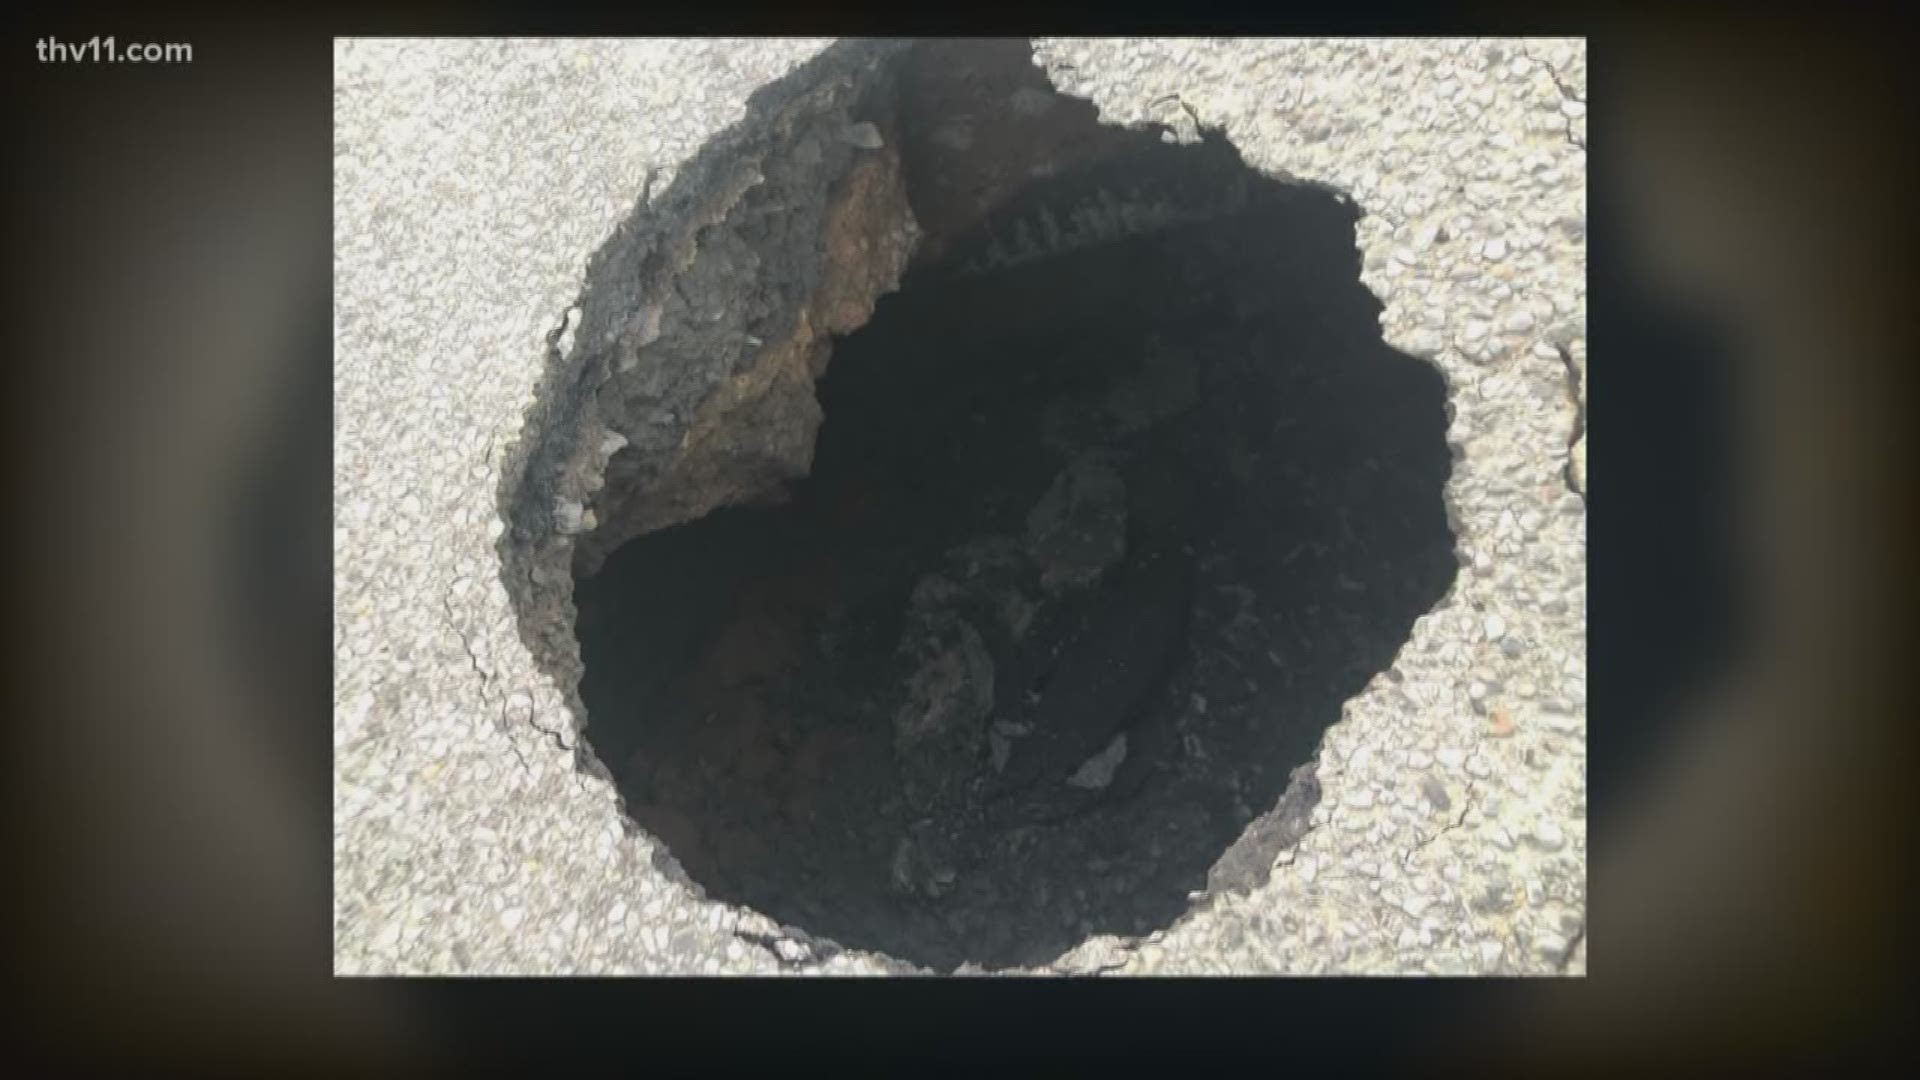 A sinkhole has caused quite a headache in the city of roundabouts.